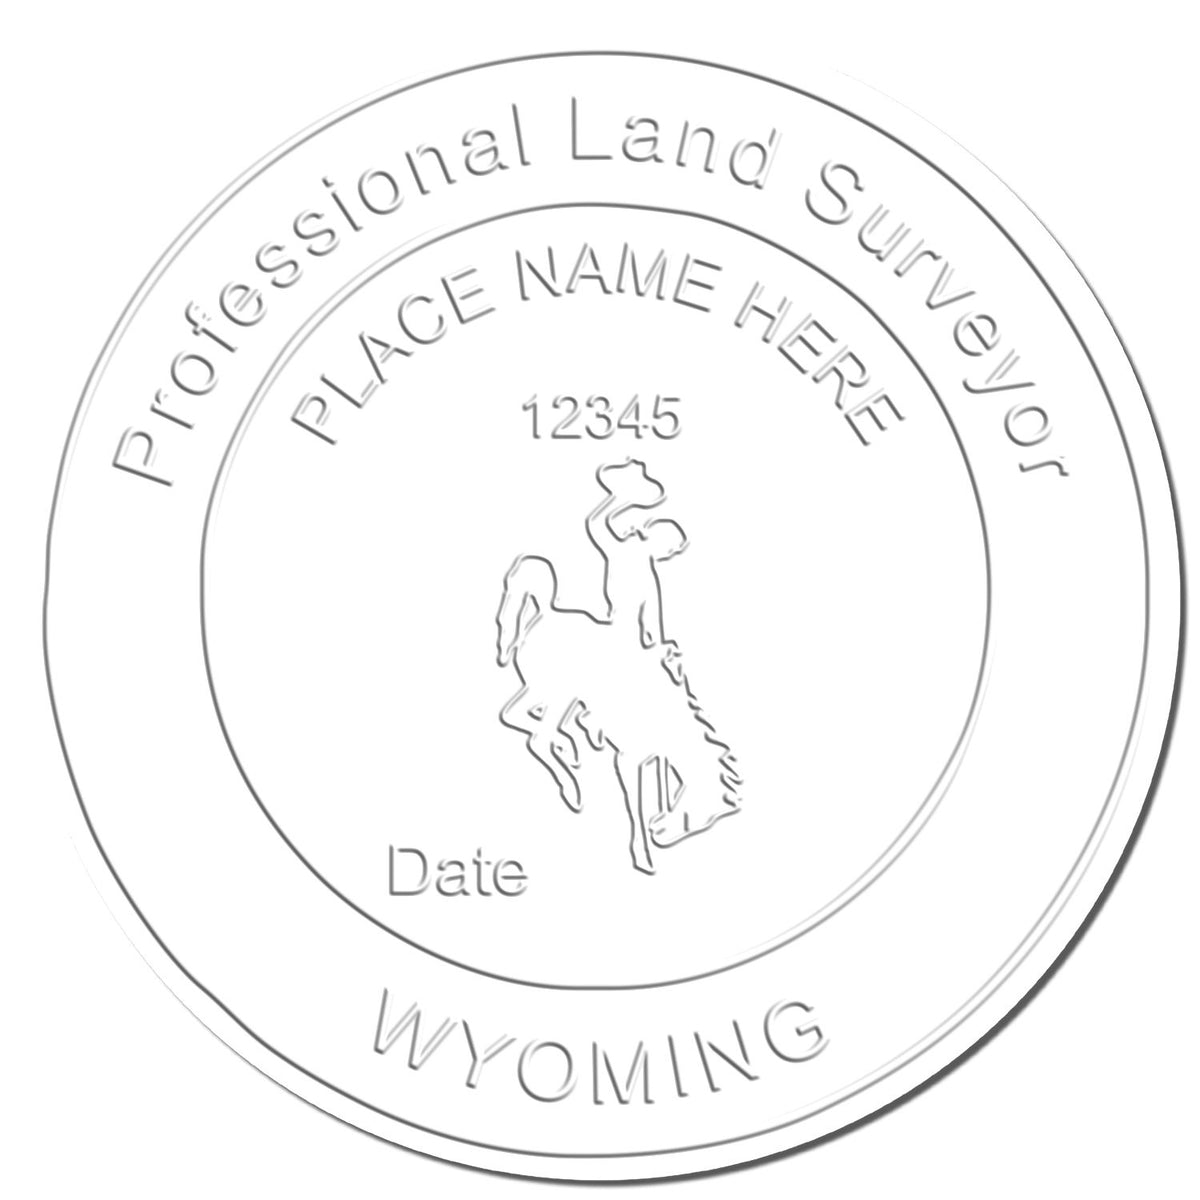 This paper is stamped with a sample imprint of the Hybrid Wyoming Land Surveyor Seal, signifying its quality and reliability.